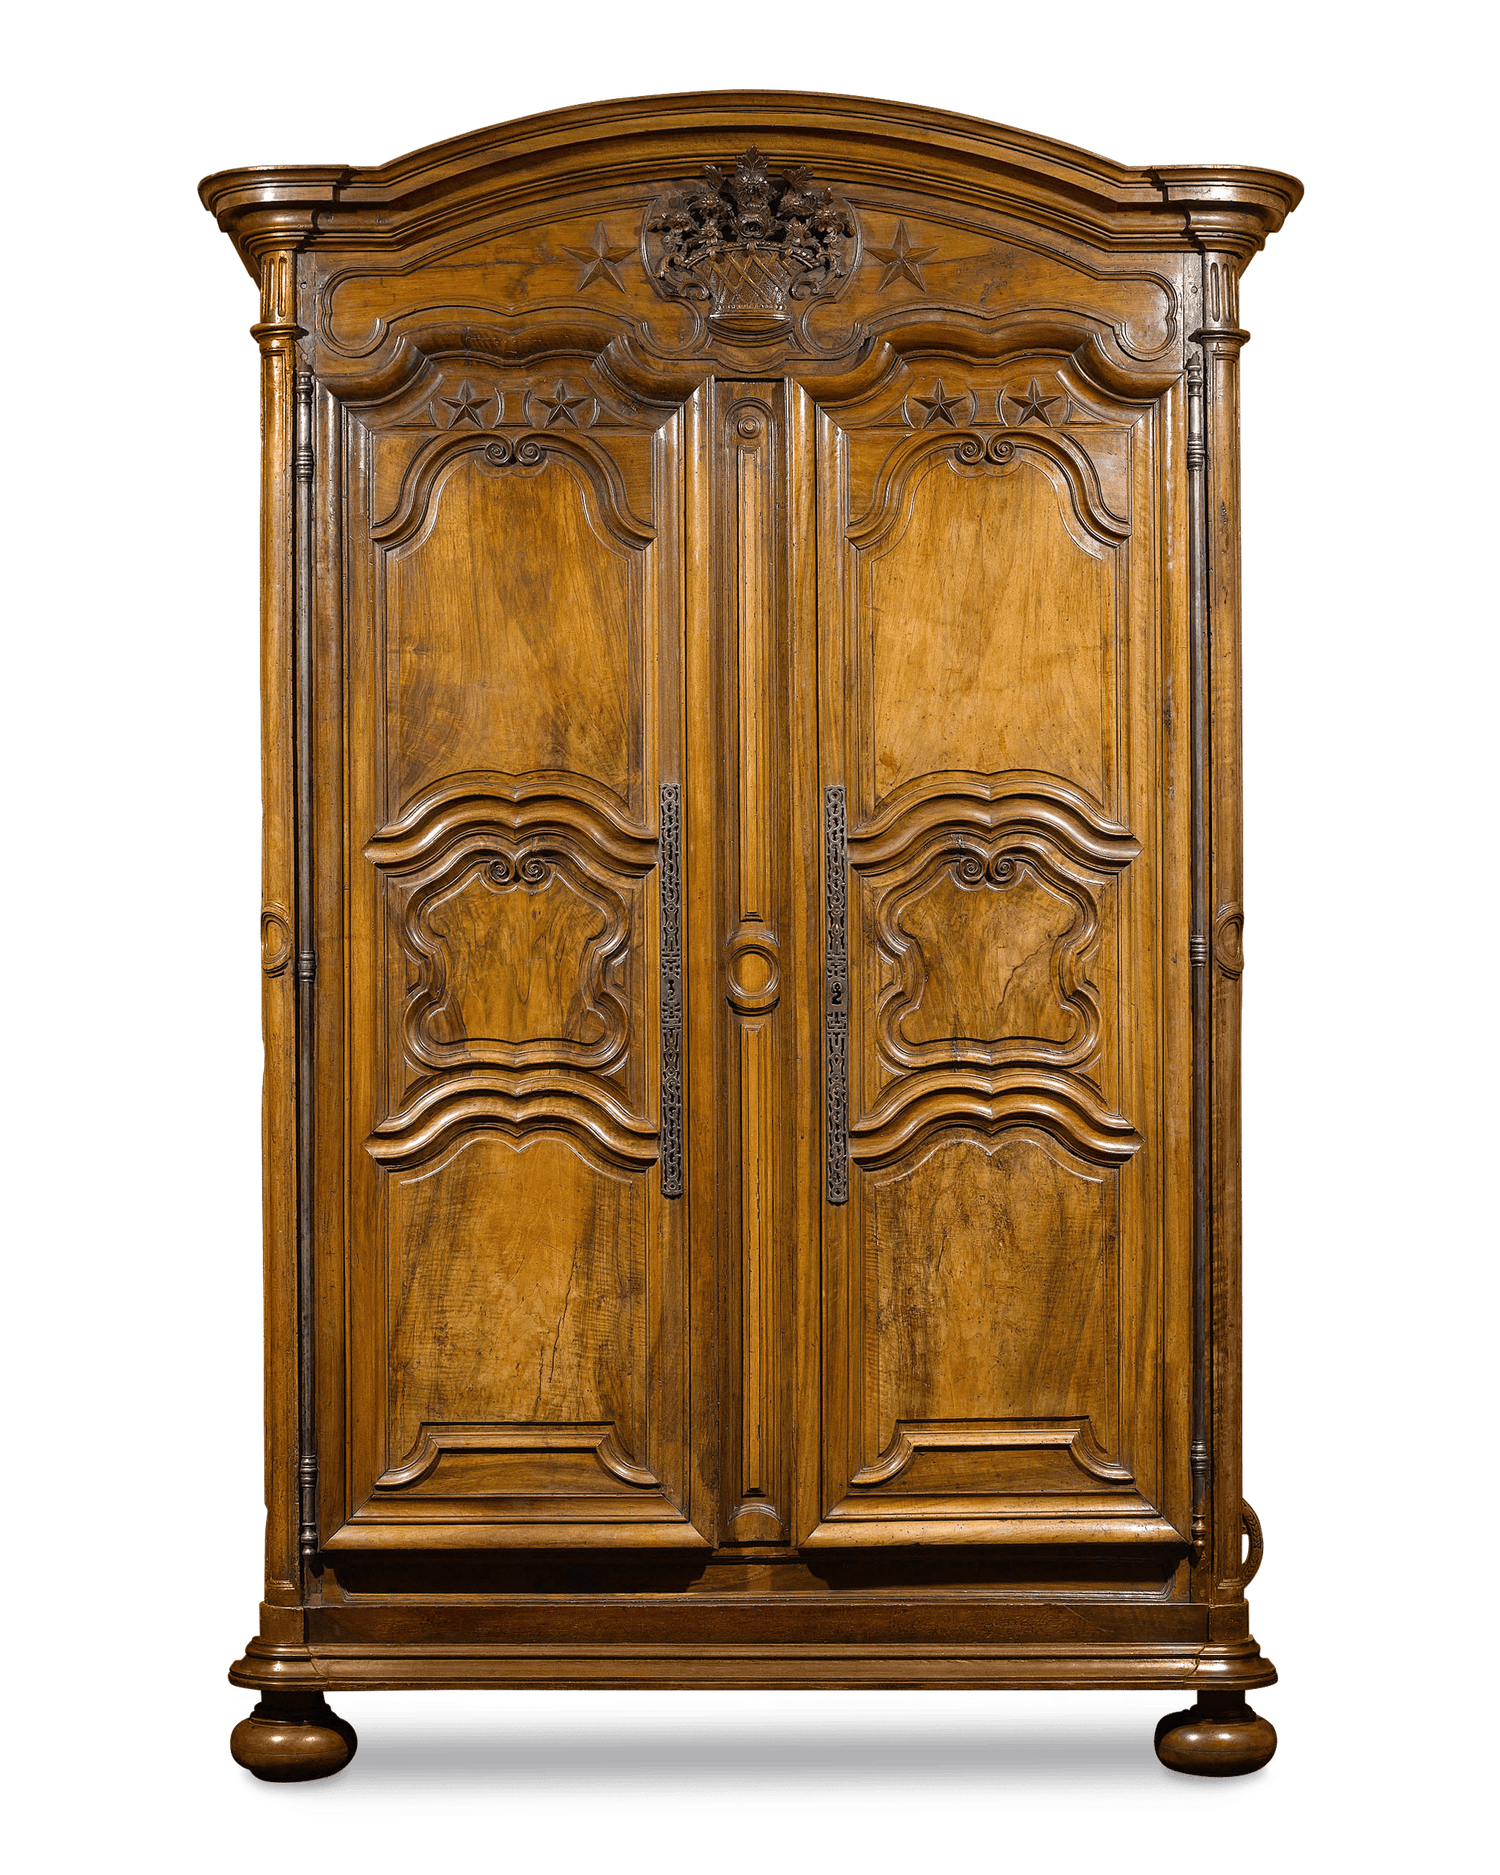 Exceptional carving distinguishes this rare French Provincial walnut armoire